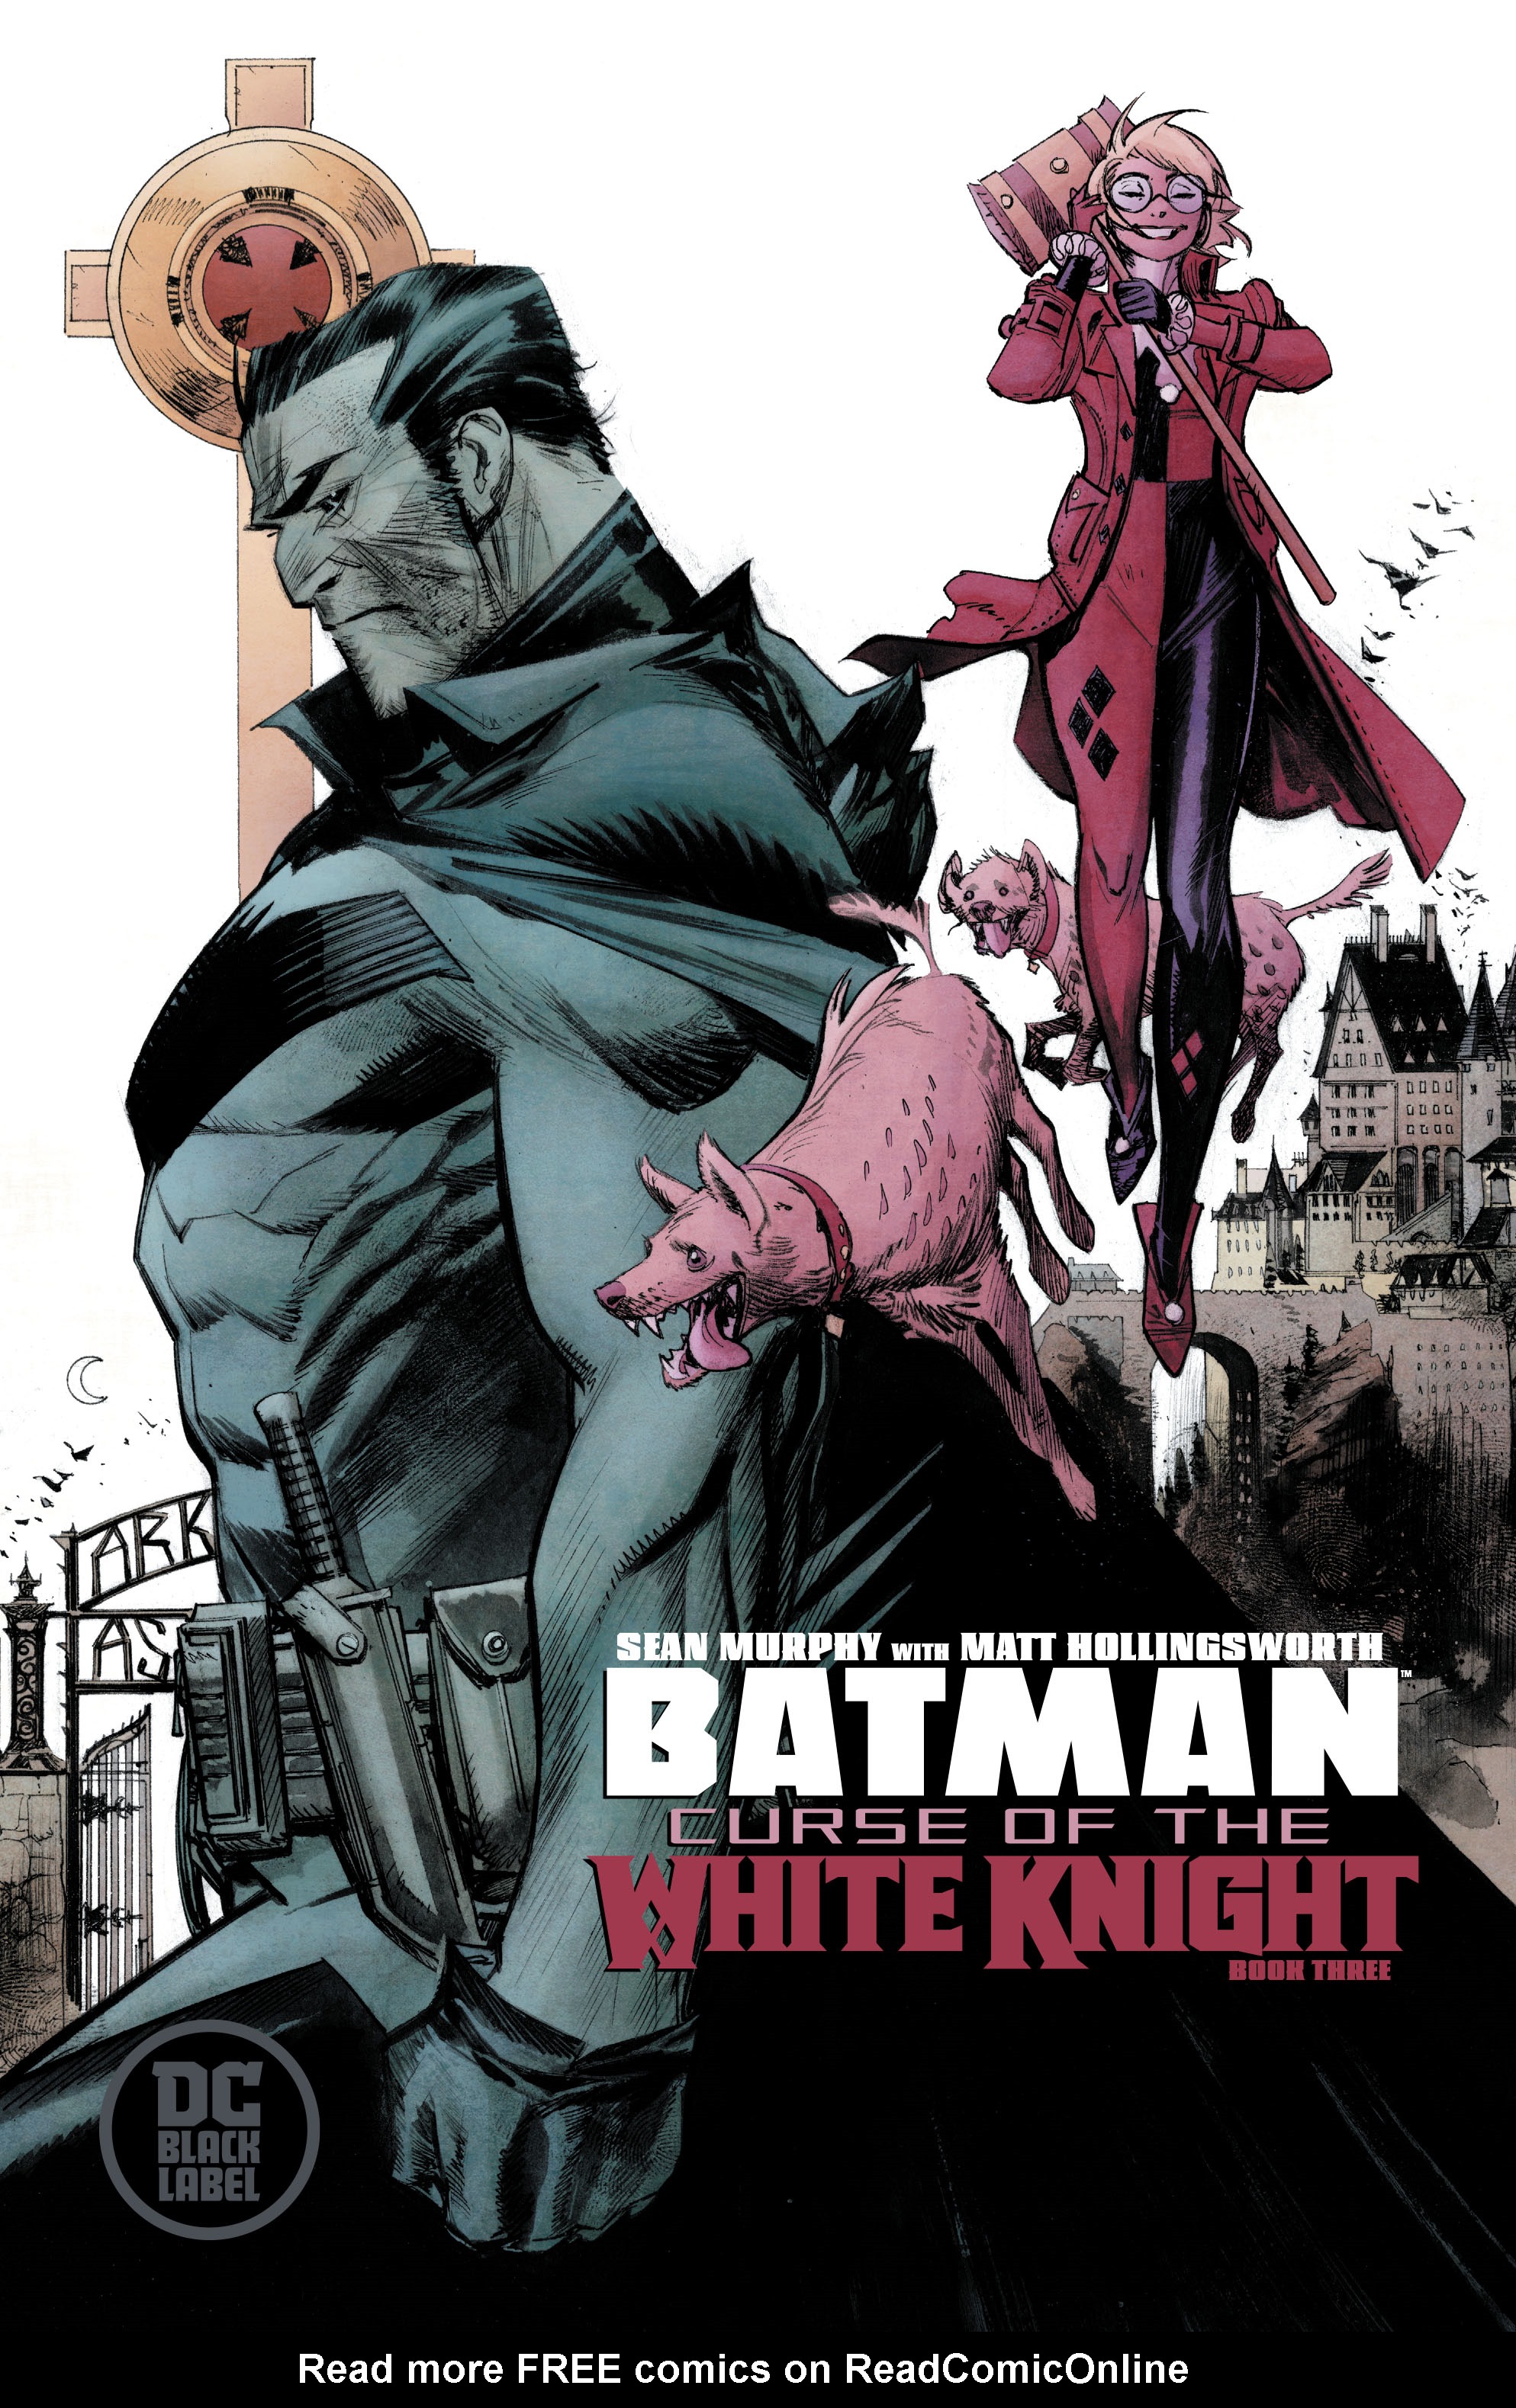 Batman Curse Of The White Knight Issue 3 | Read Batman Curse Of The White  Knight Issue 3 comic online in high quality. Read Full Comic online for  free - Read comics